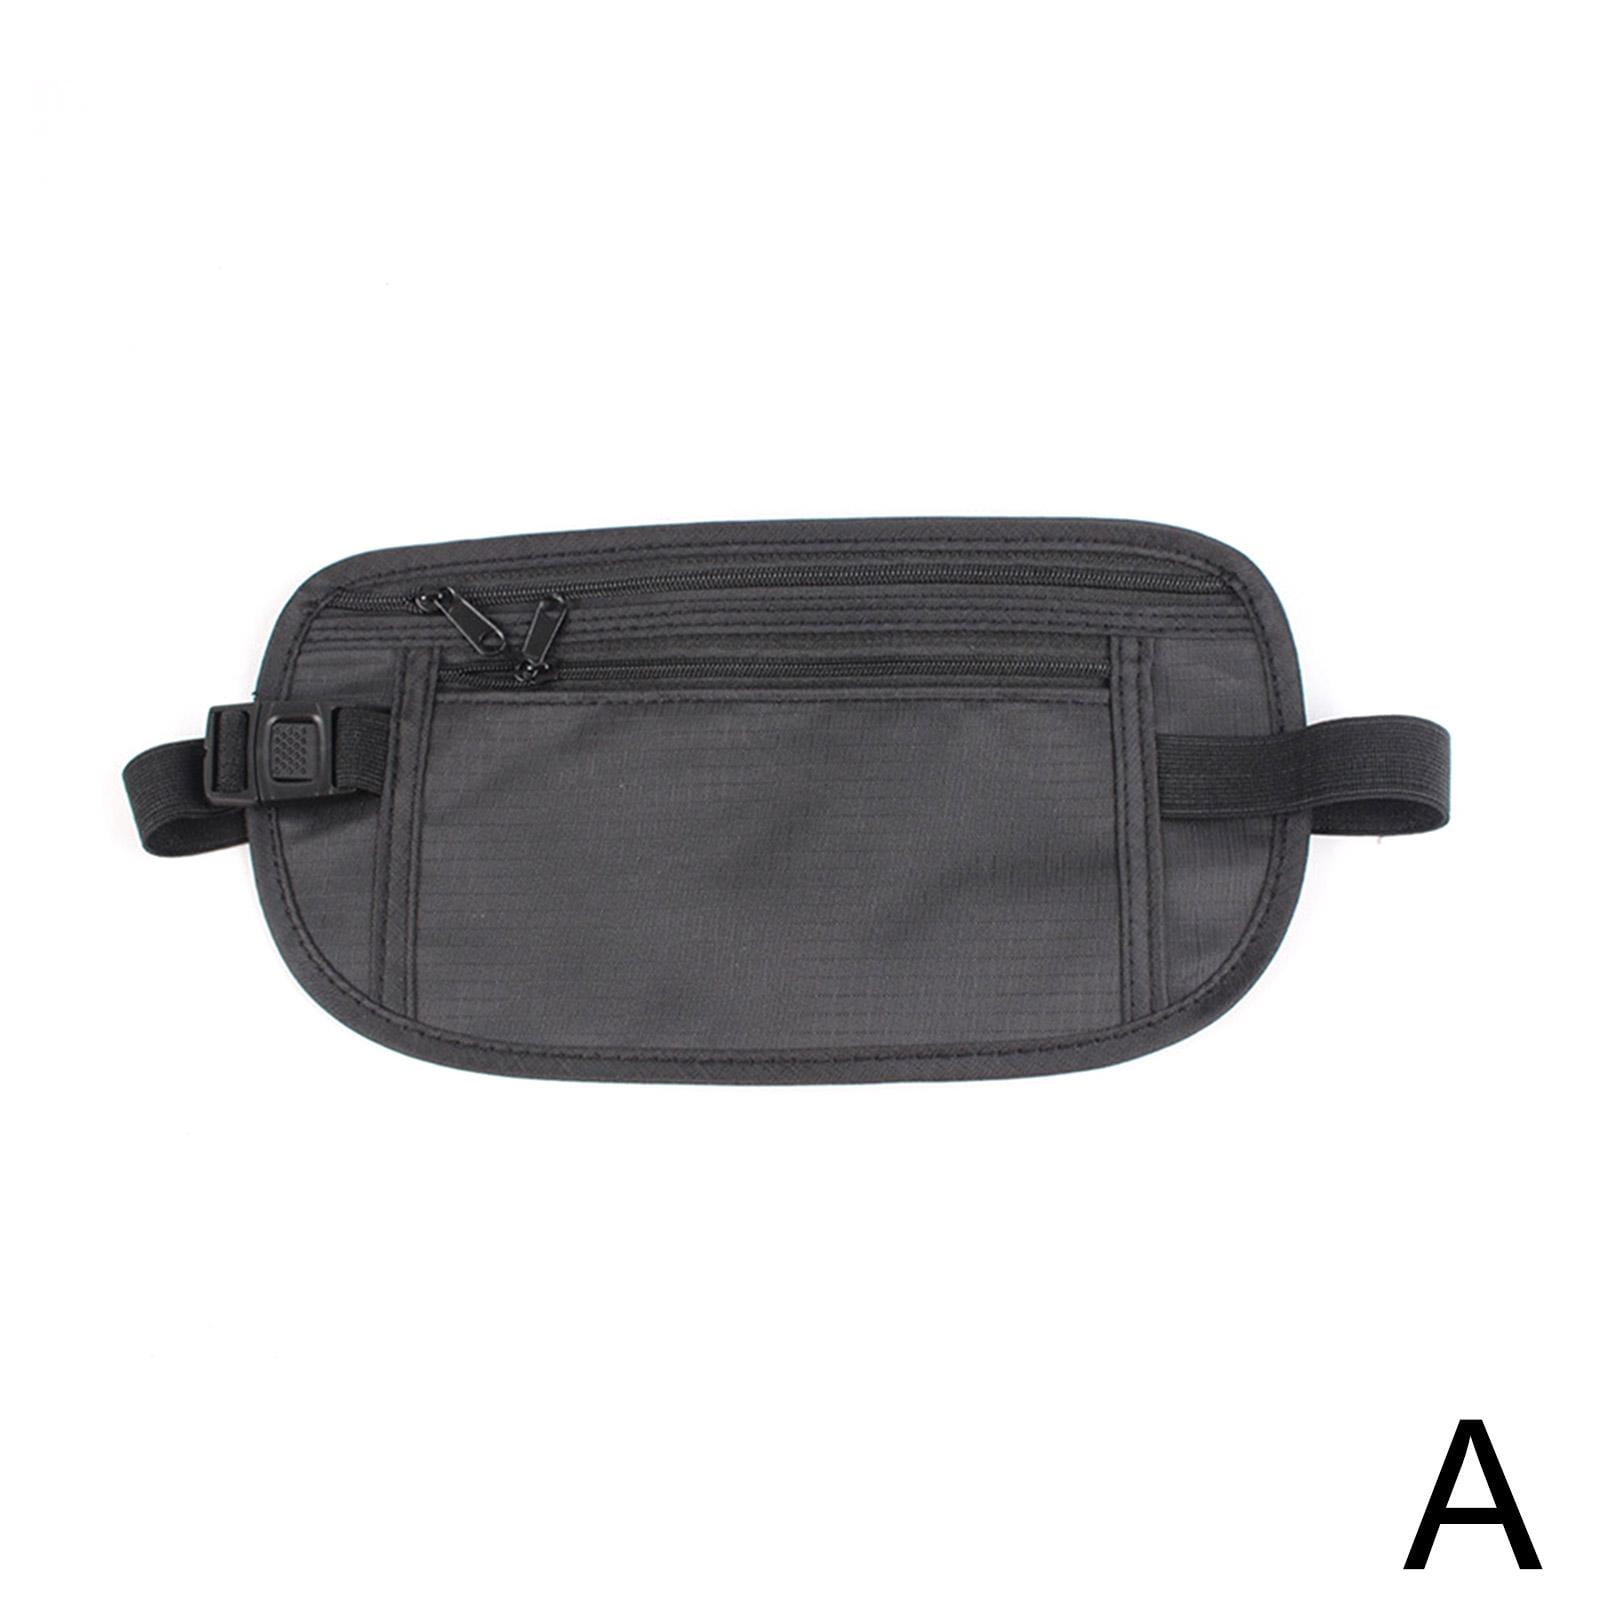 Waist Bag Genuine Leather Belt Pouch Multifunctional Fanny Pack for Men  Driver's license ID cards wallet Car Key Organizer LFKGD